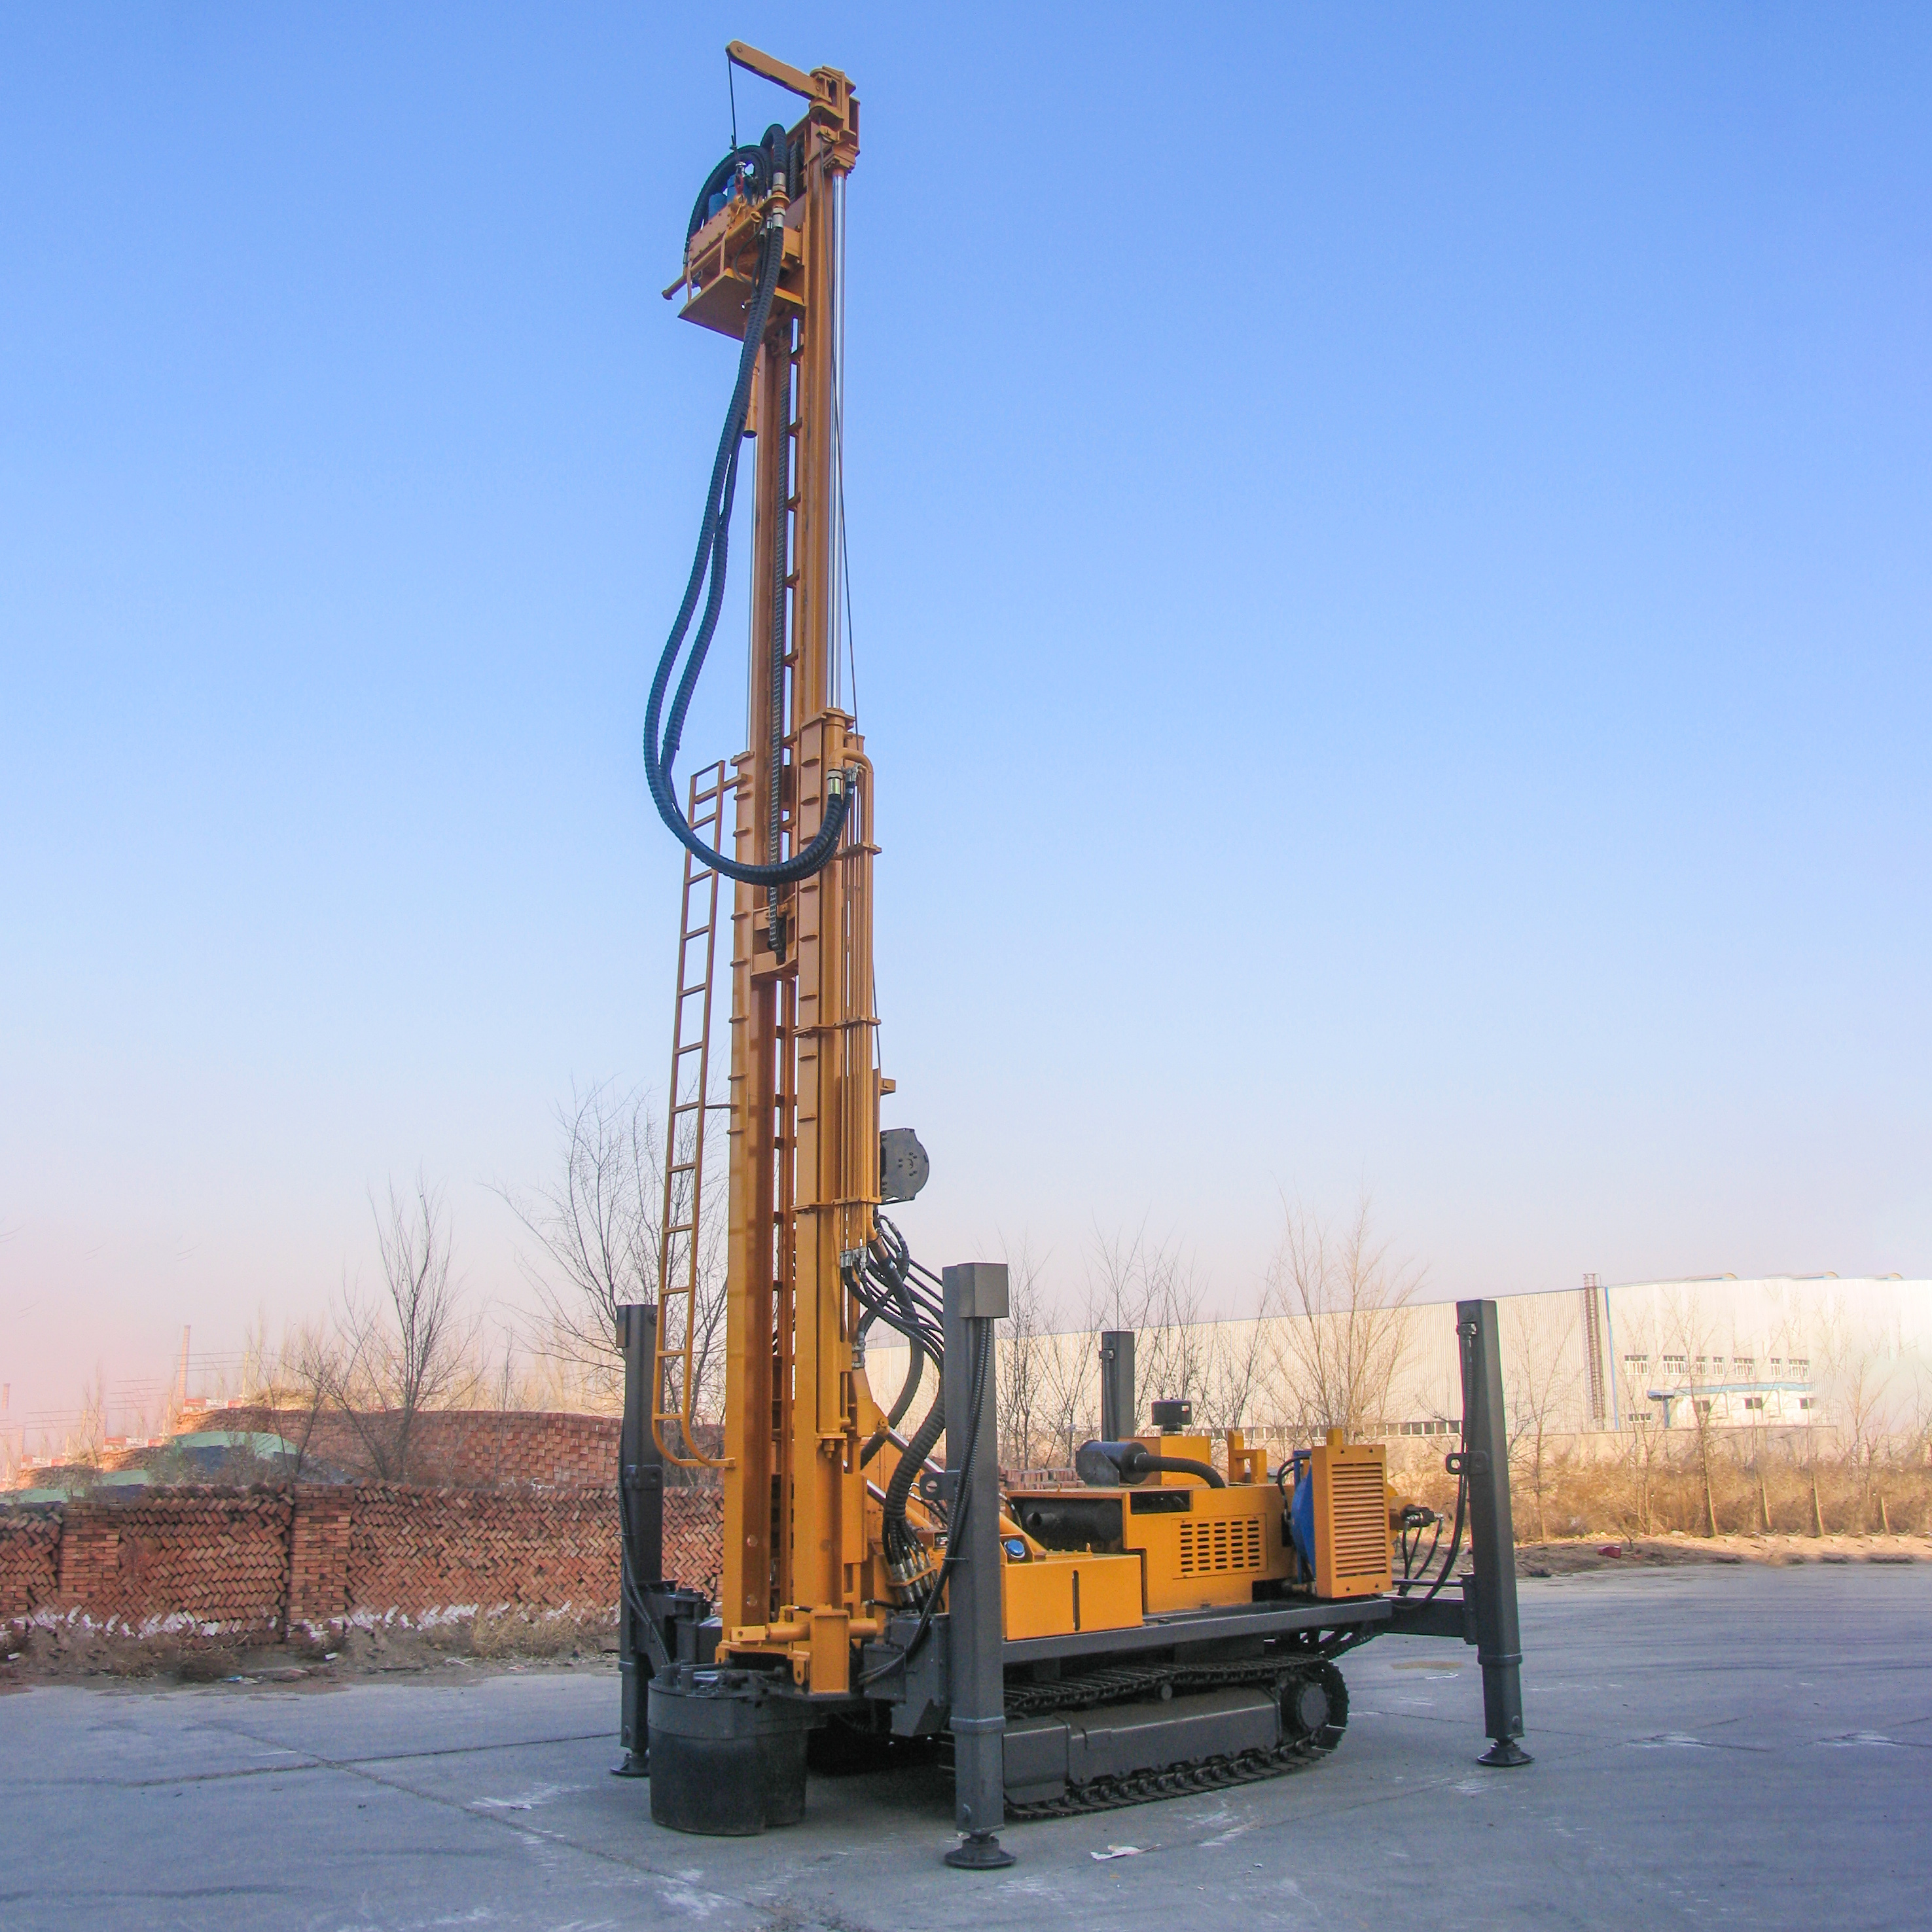 What inspection work should be done before using the water well drilling rig?